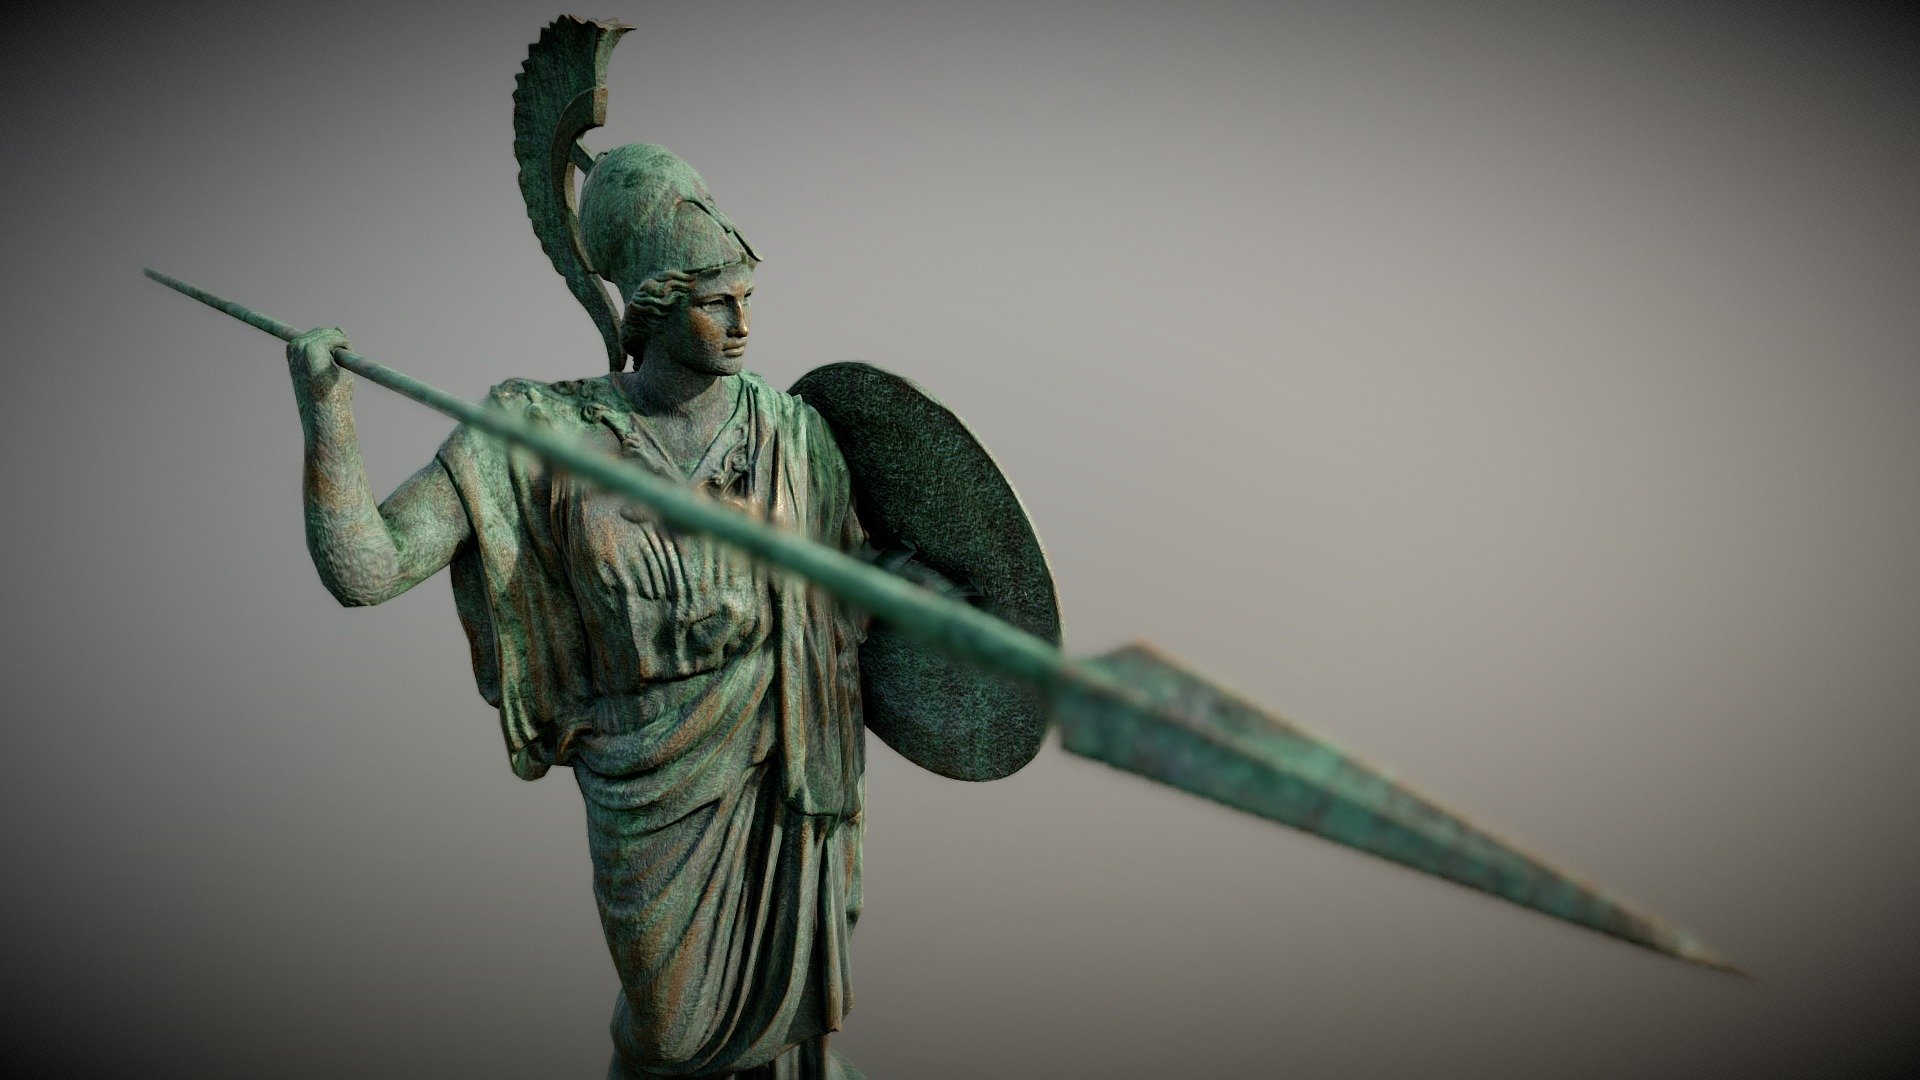 A recreation of the Athena Promachos.  The original was destroyed long ago, so I recreated this from examples of other statues of Athena based on the descriptions of the original statue.

The model was modeled based on two scans of other statues.

Thanks to Cosmo Wenman for the Athena of Velettri found here&hellip;
https://www.thingiverse.com/thing:196039

and thanks to Jerry Fisher for his Minerva Giustiniani found here&hellip;
https://www.thingiverse.com/thing:737349

I modeled the and retopologized the statue from those sources in zbrush and painted the textures in Substance Painter 3d model